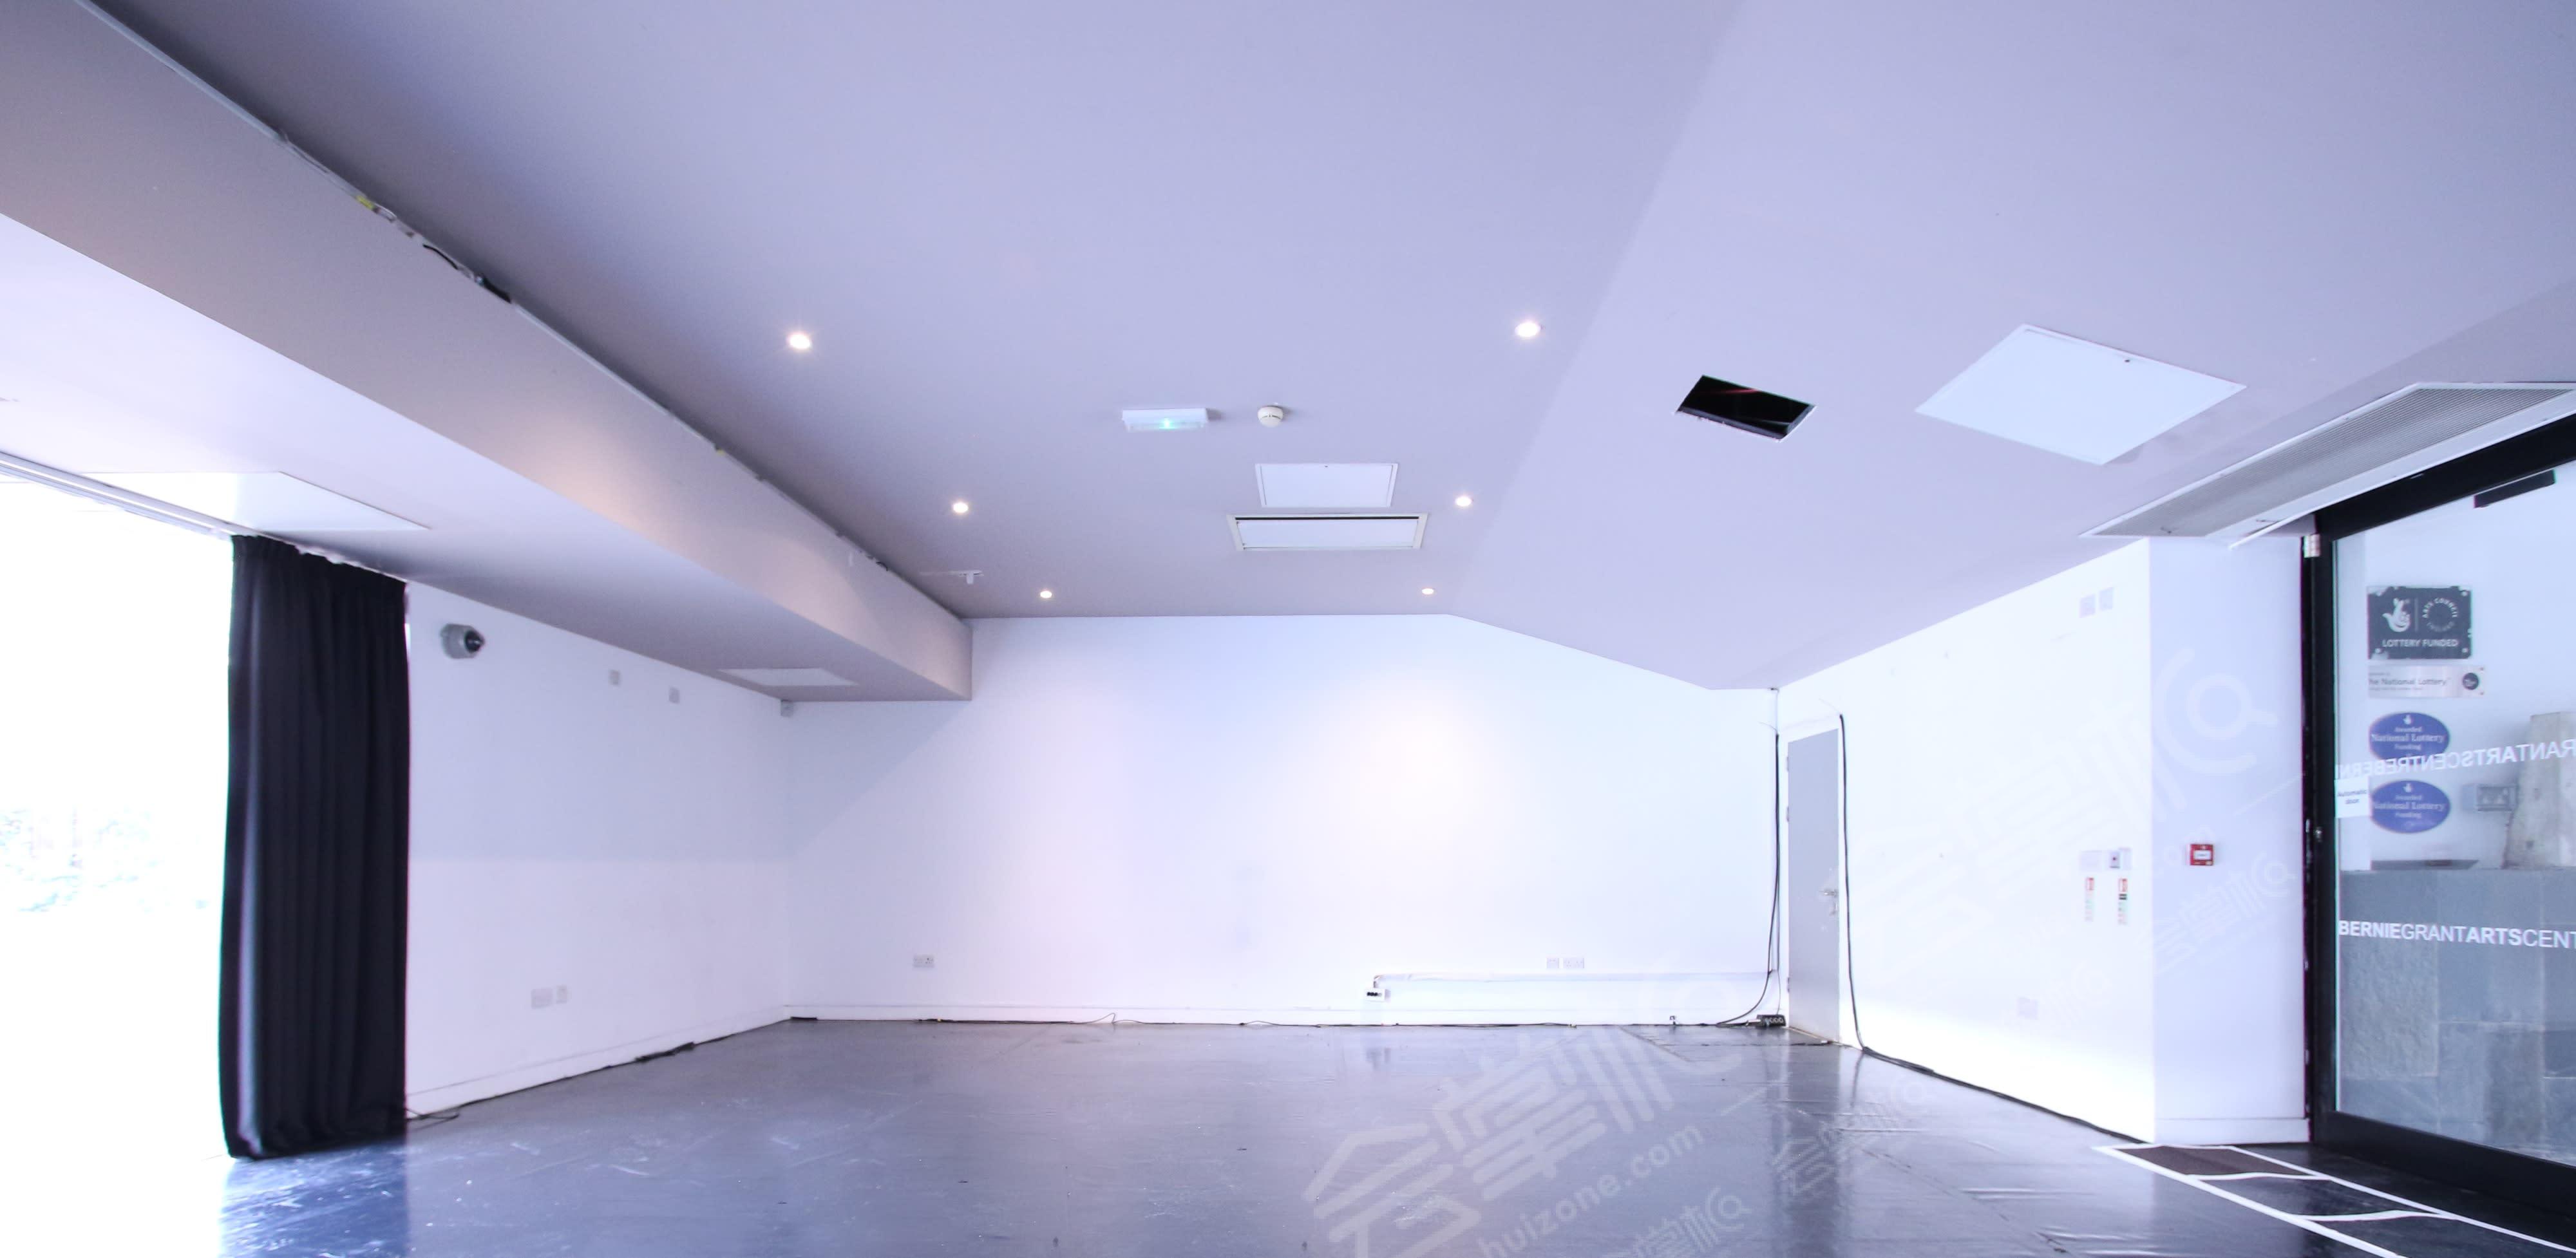 Event Studio great for Rehearsals and Fitness Classes